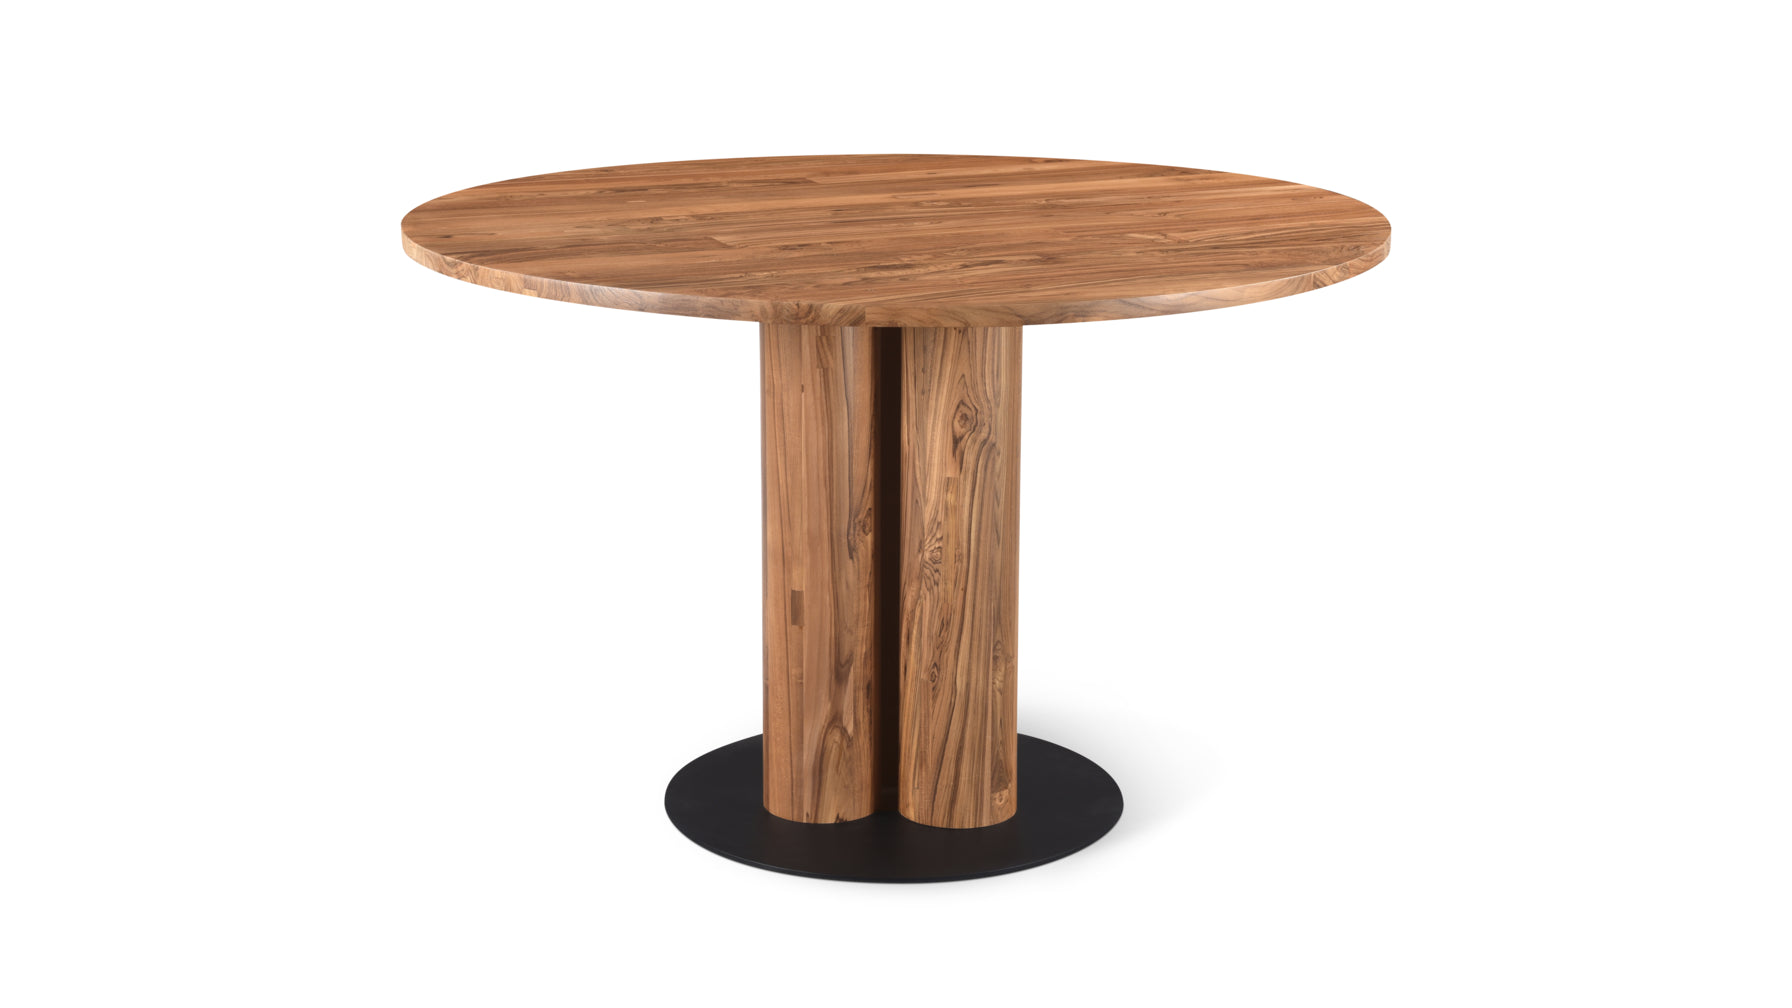 Formation Outdoor Dining Table, Seats 4-5 People, Teak - Image 3